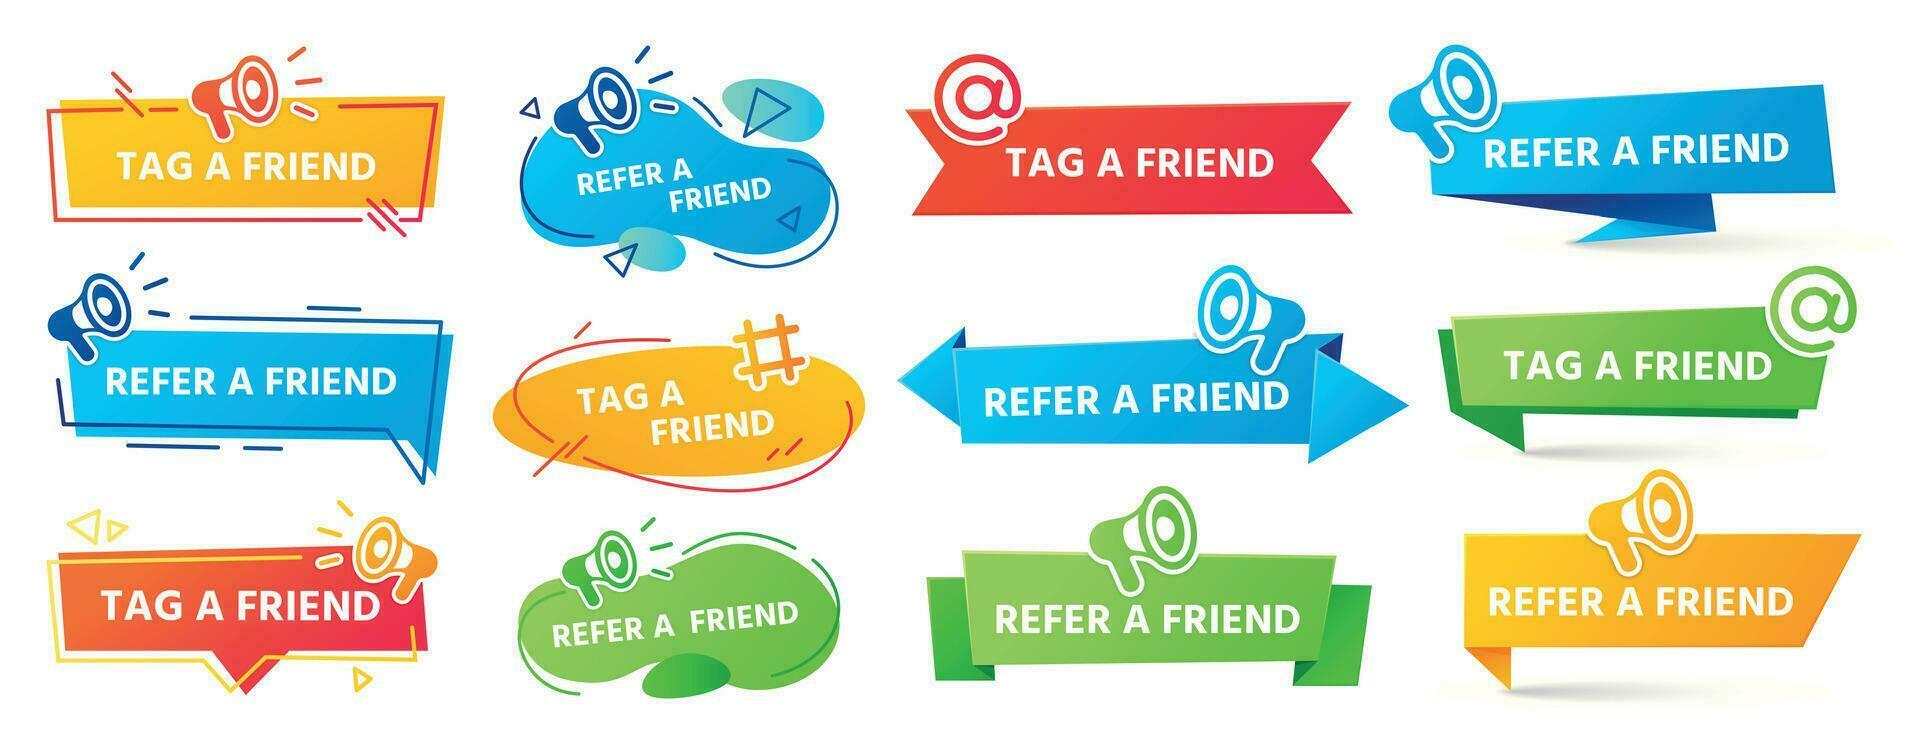 Refer a friend banner. Referral program label, friends recommendation and social marketing tag friend banners vector set